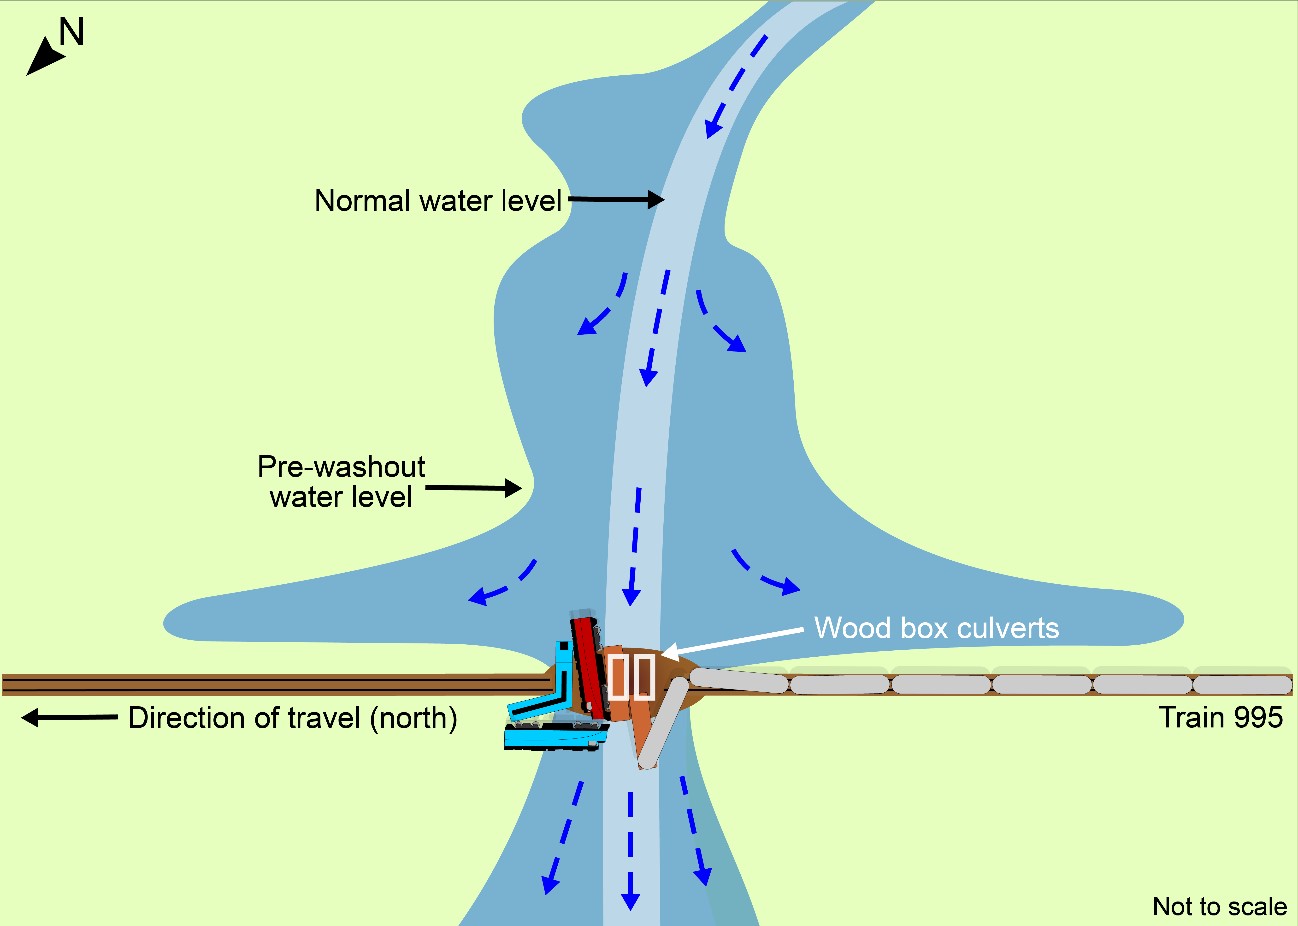 Schematic of derailment site showing the water levels under normal conditions and before the washout (Source: TSB)